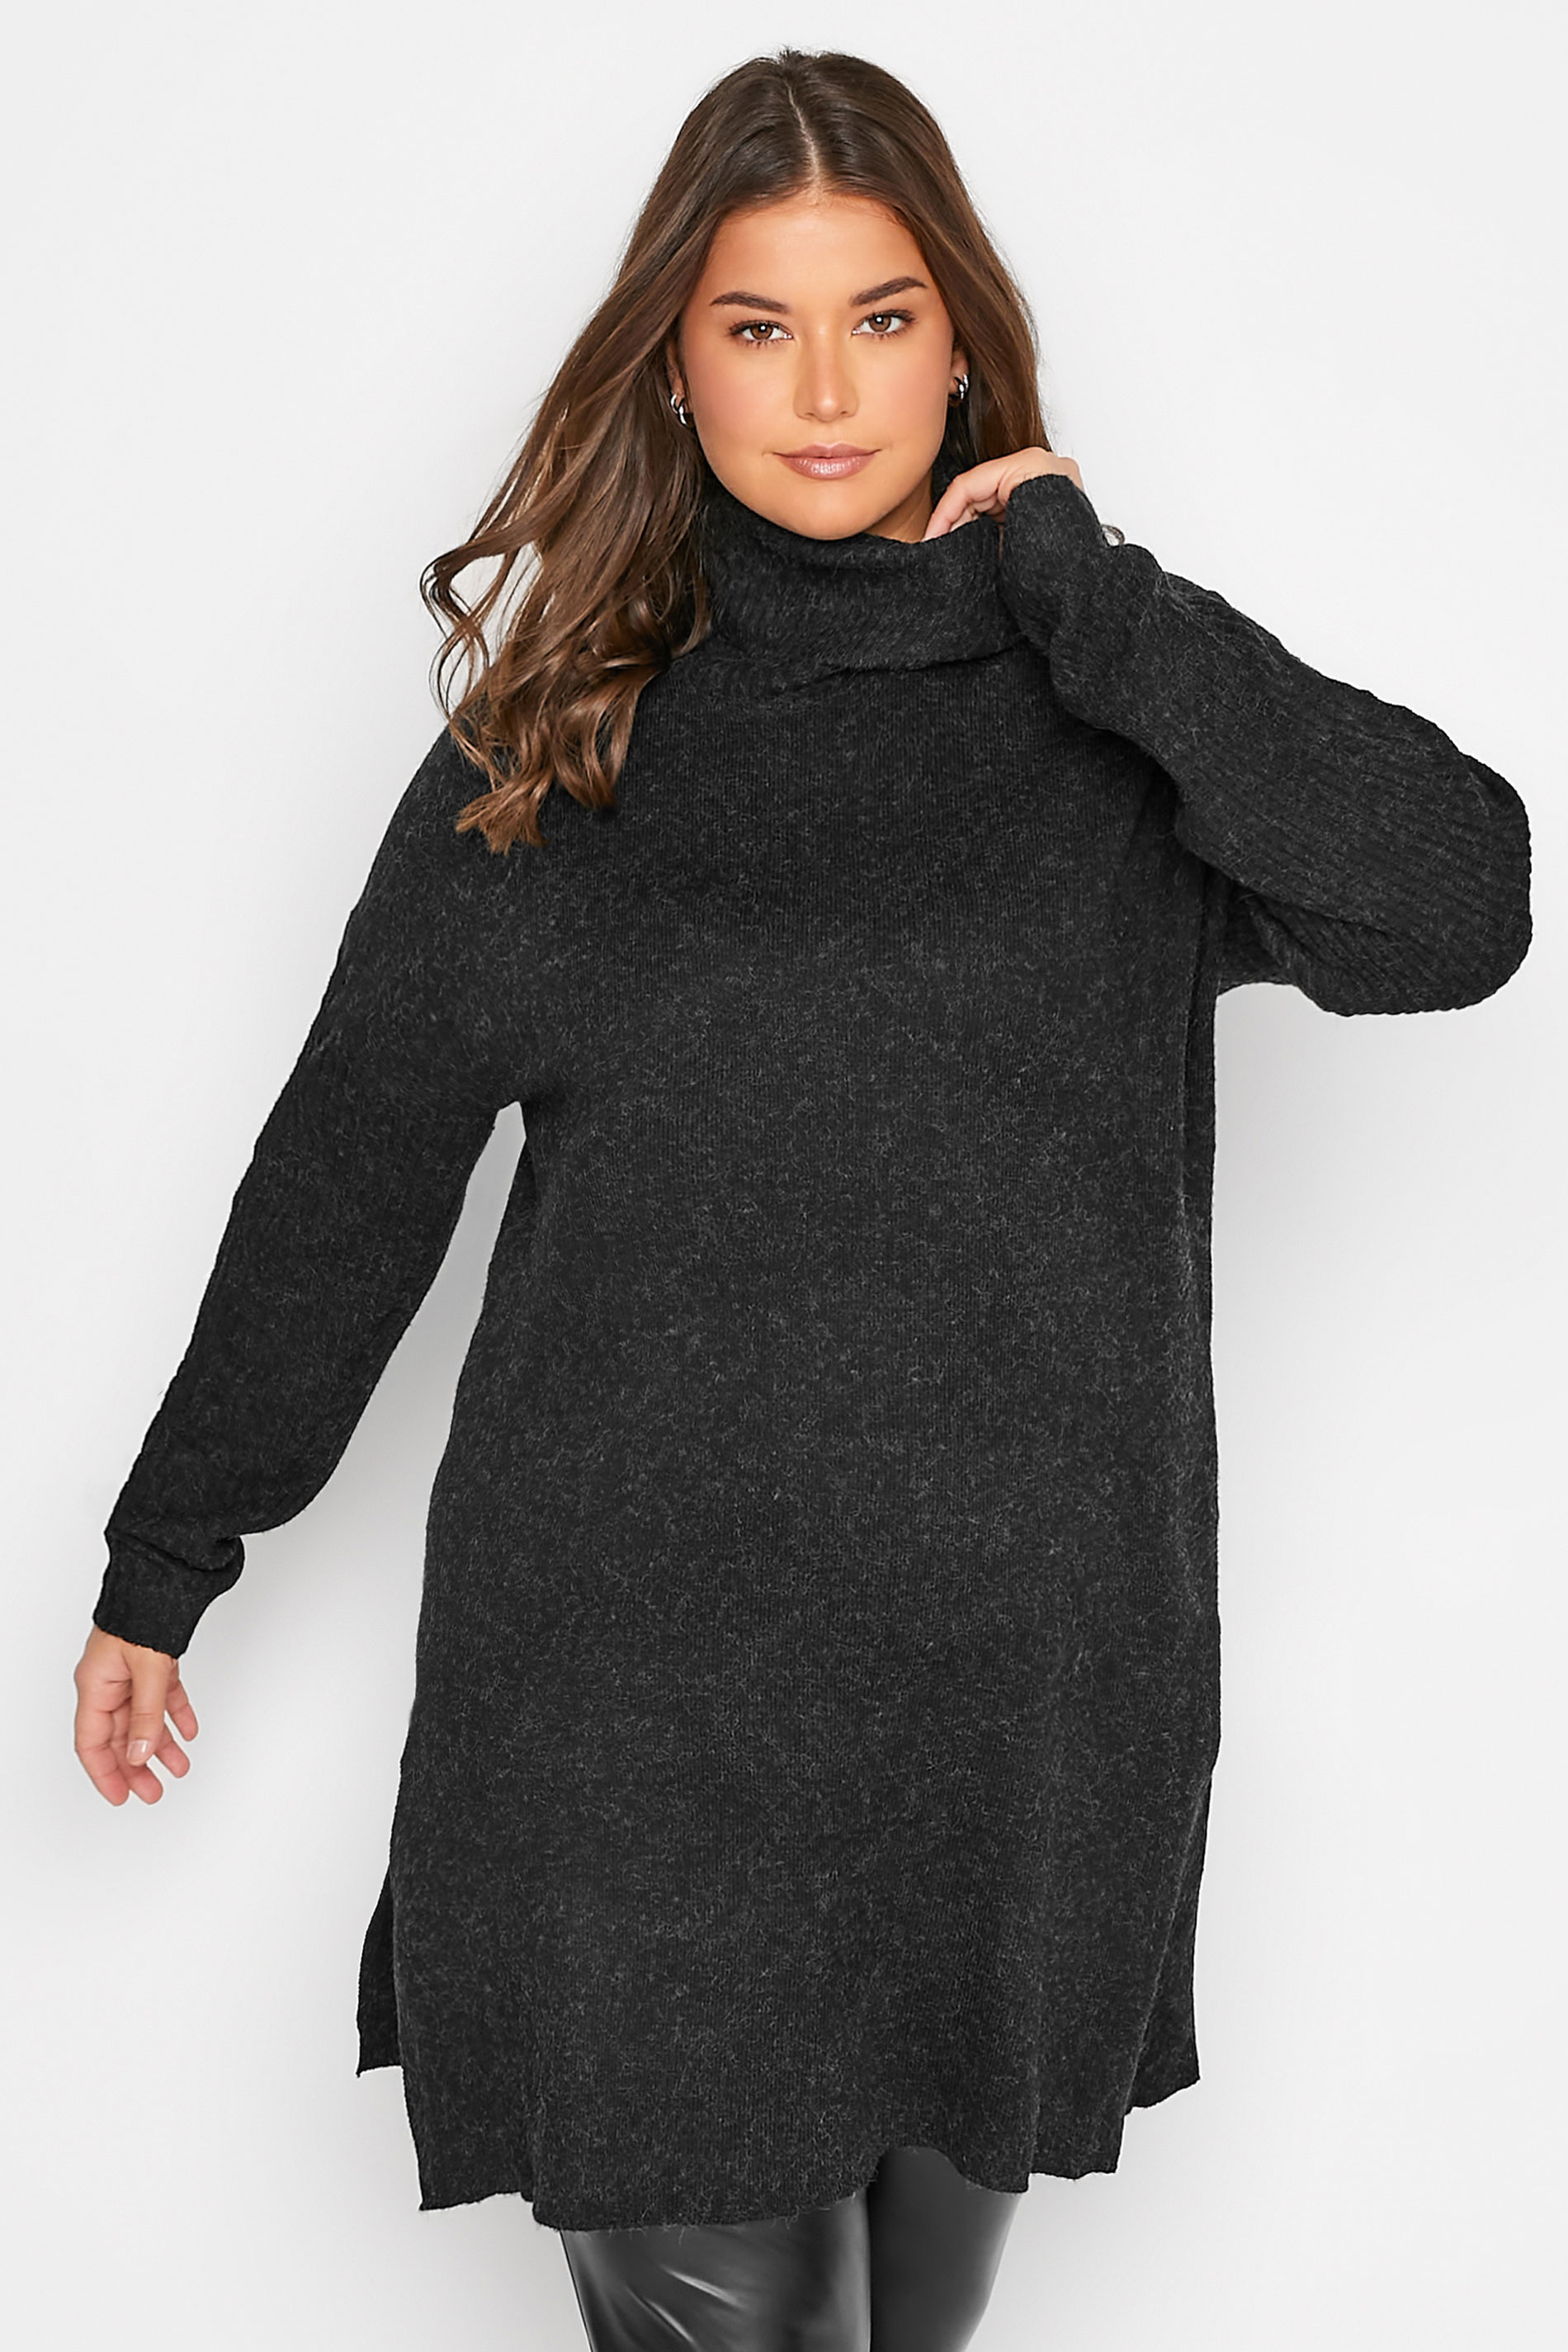 LTS Tall Women's Charcoal Grey Turtle Neck Knitted Tunic Jumper | Long Tall Sally 1